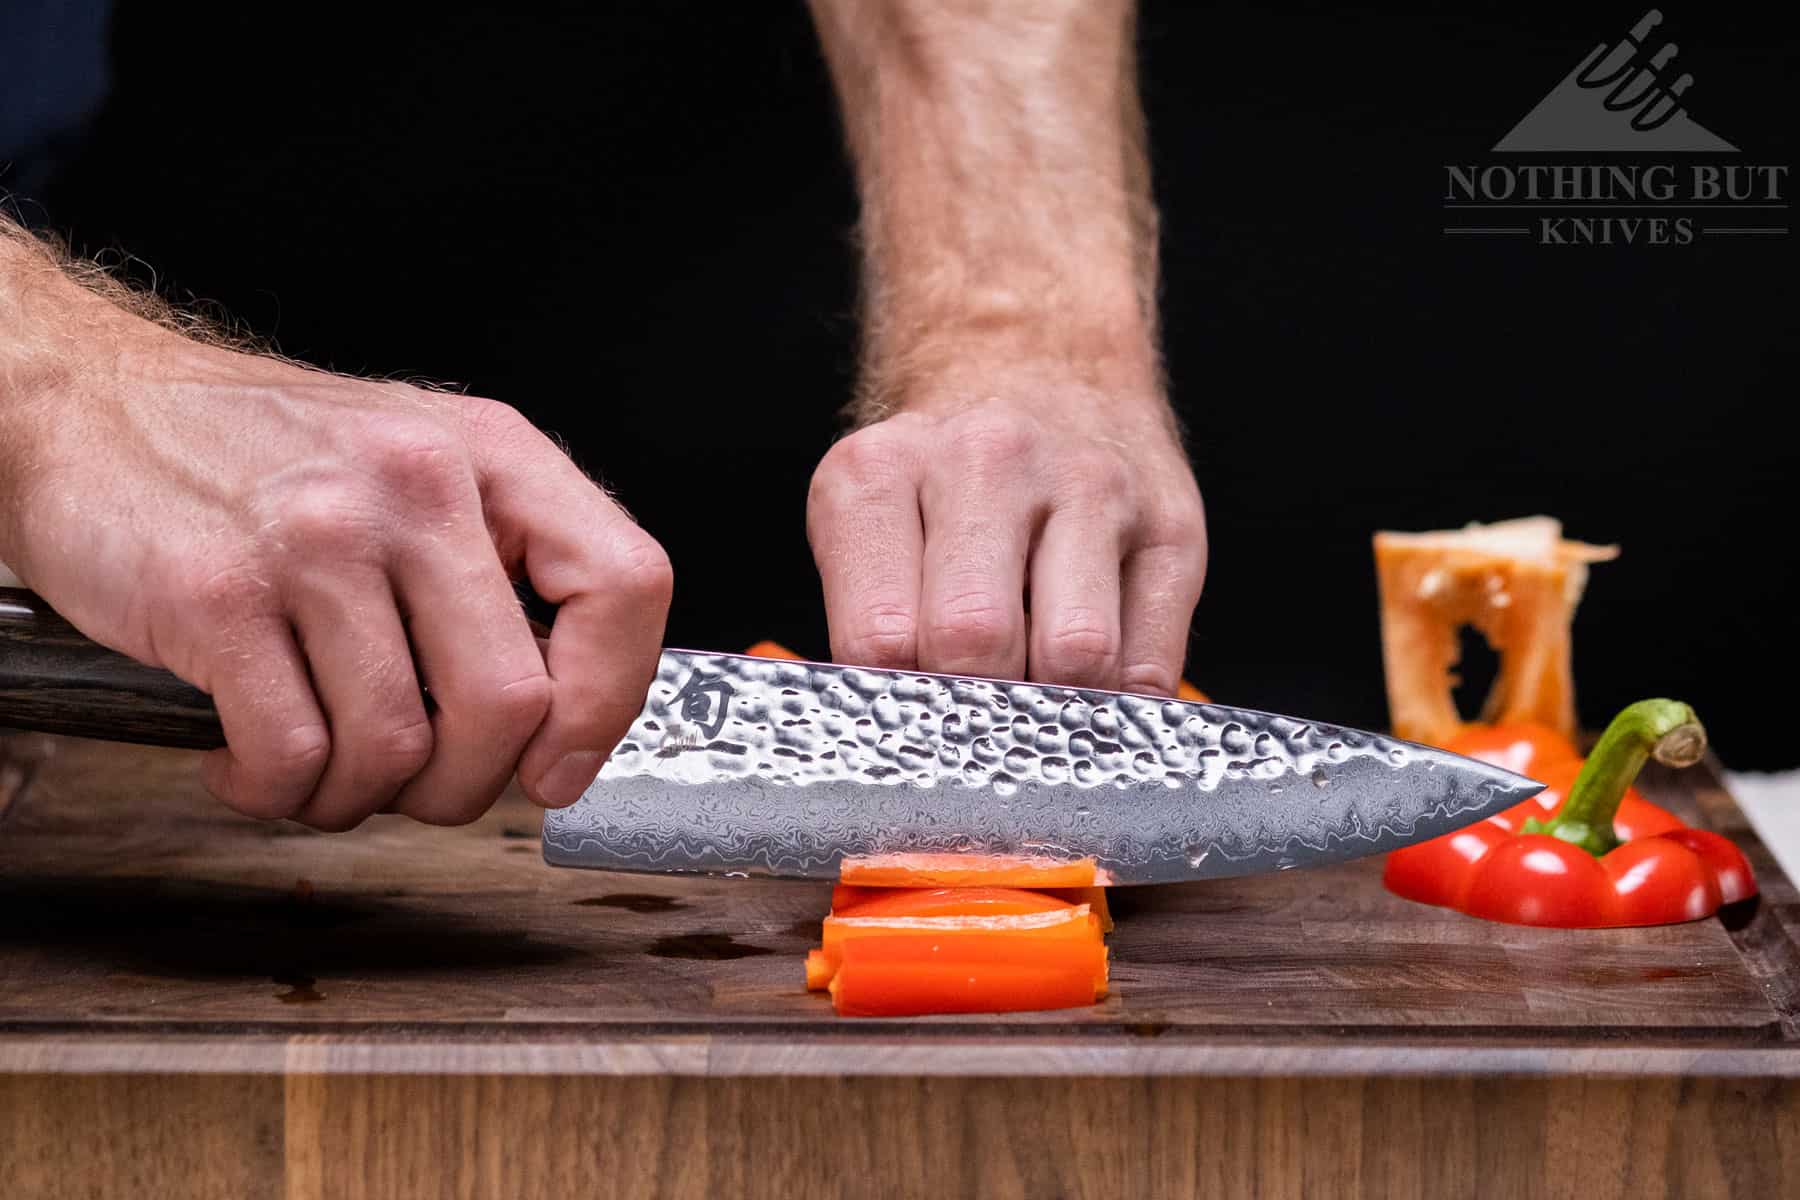 This image illustrates the proper way to hold the Shun Premier chef knife in a pinch grip. 